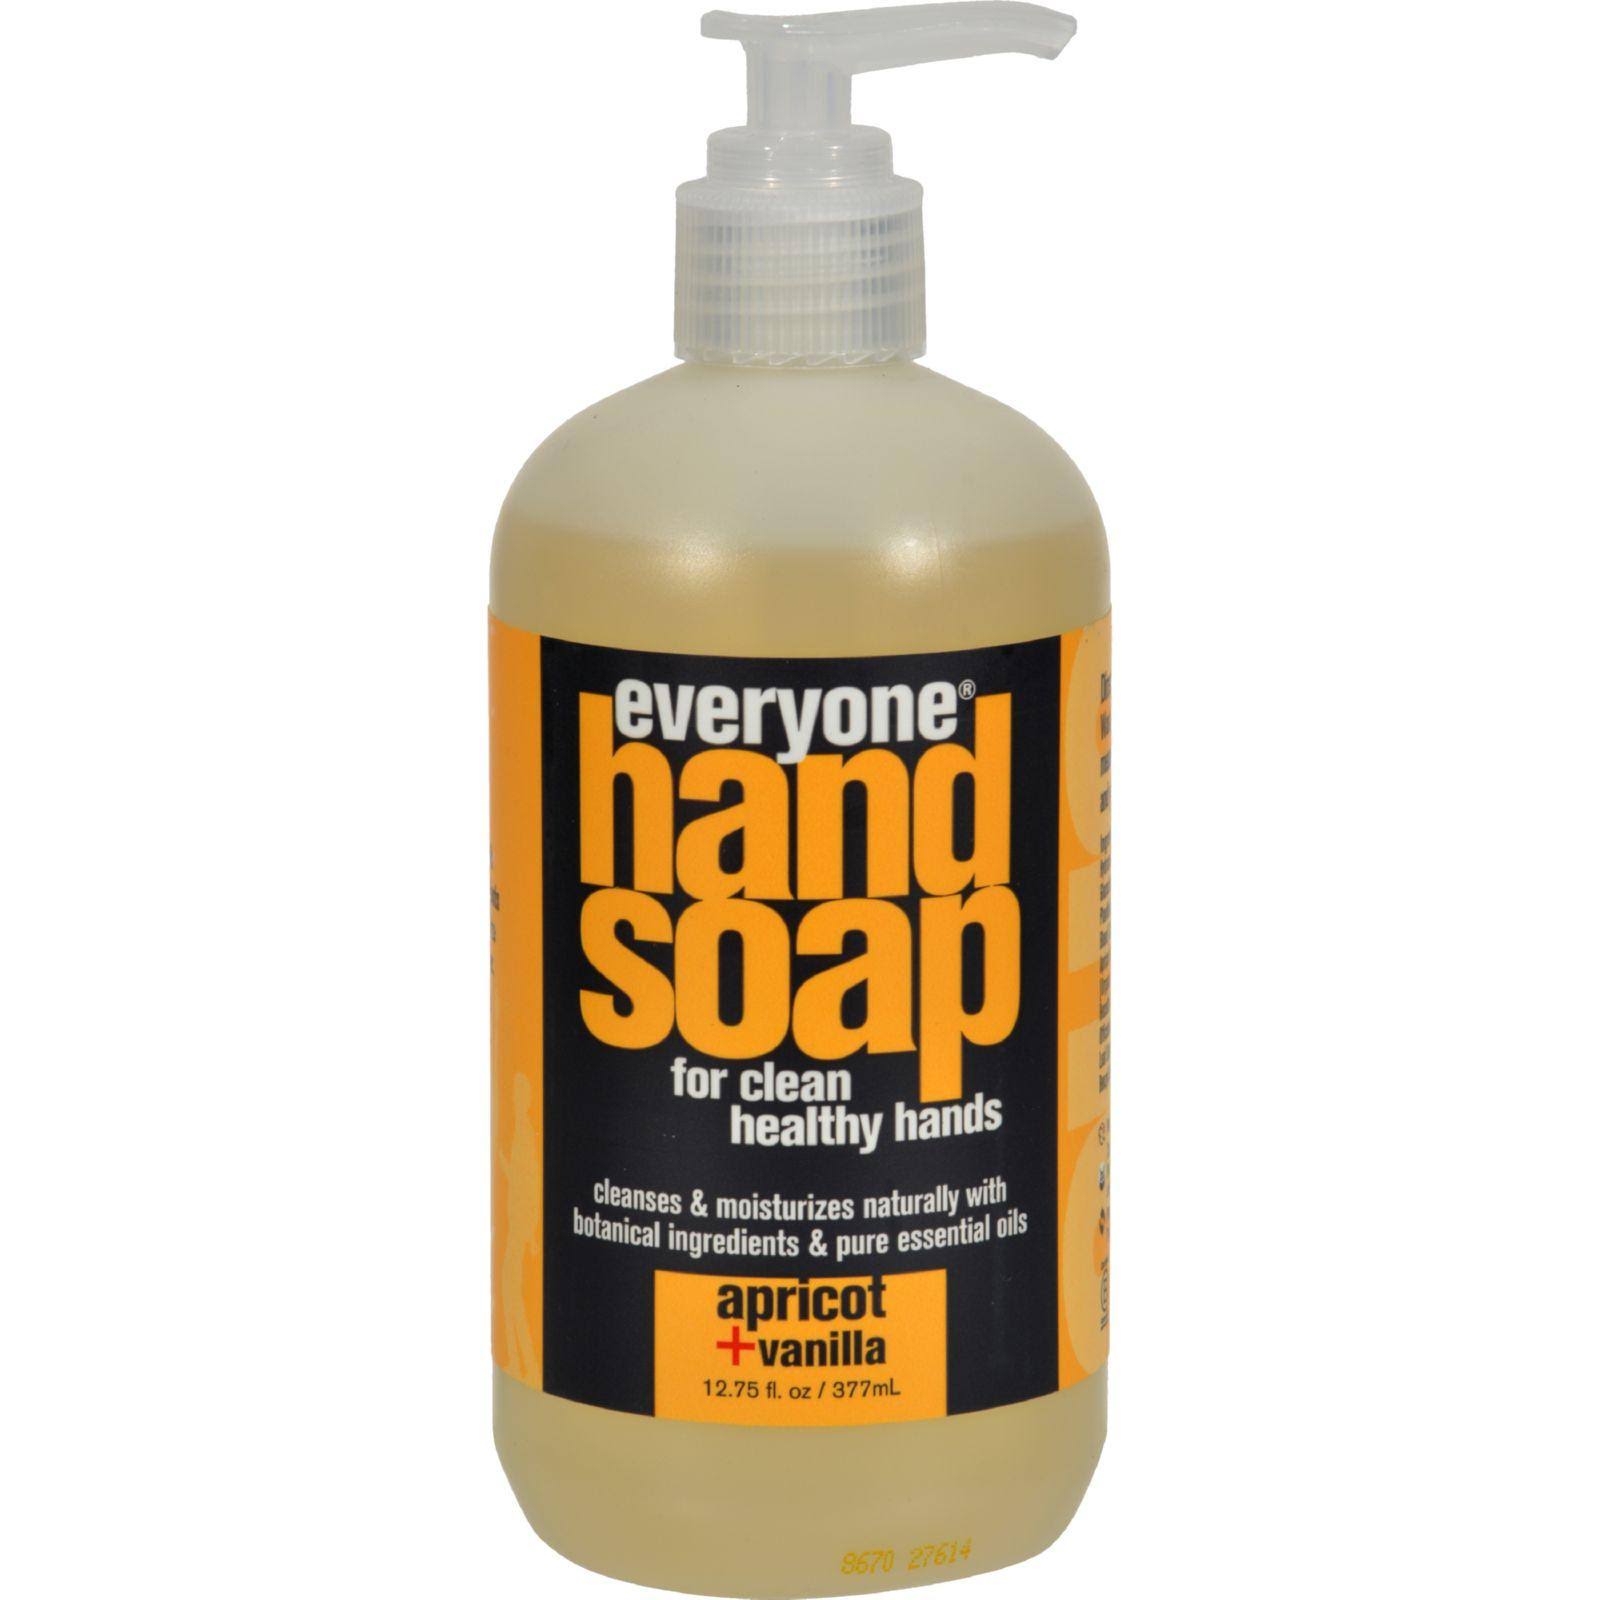 EO Products Everyone Hand Soap - Apricot and Vanilla, 12.75oz